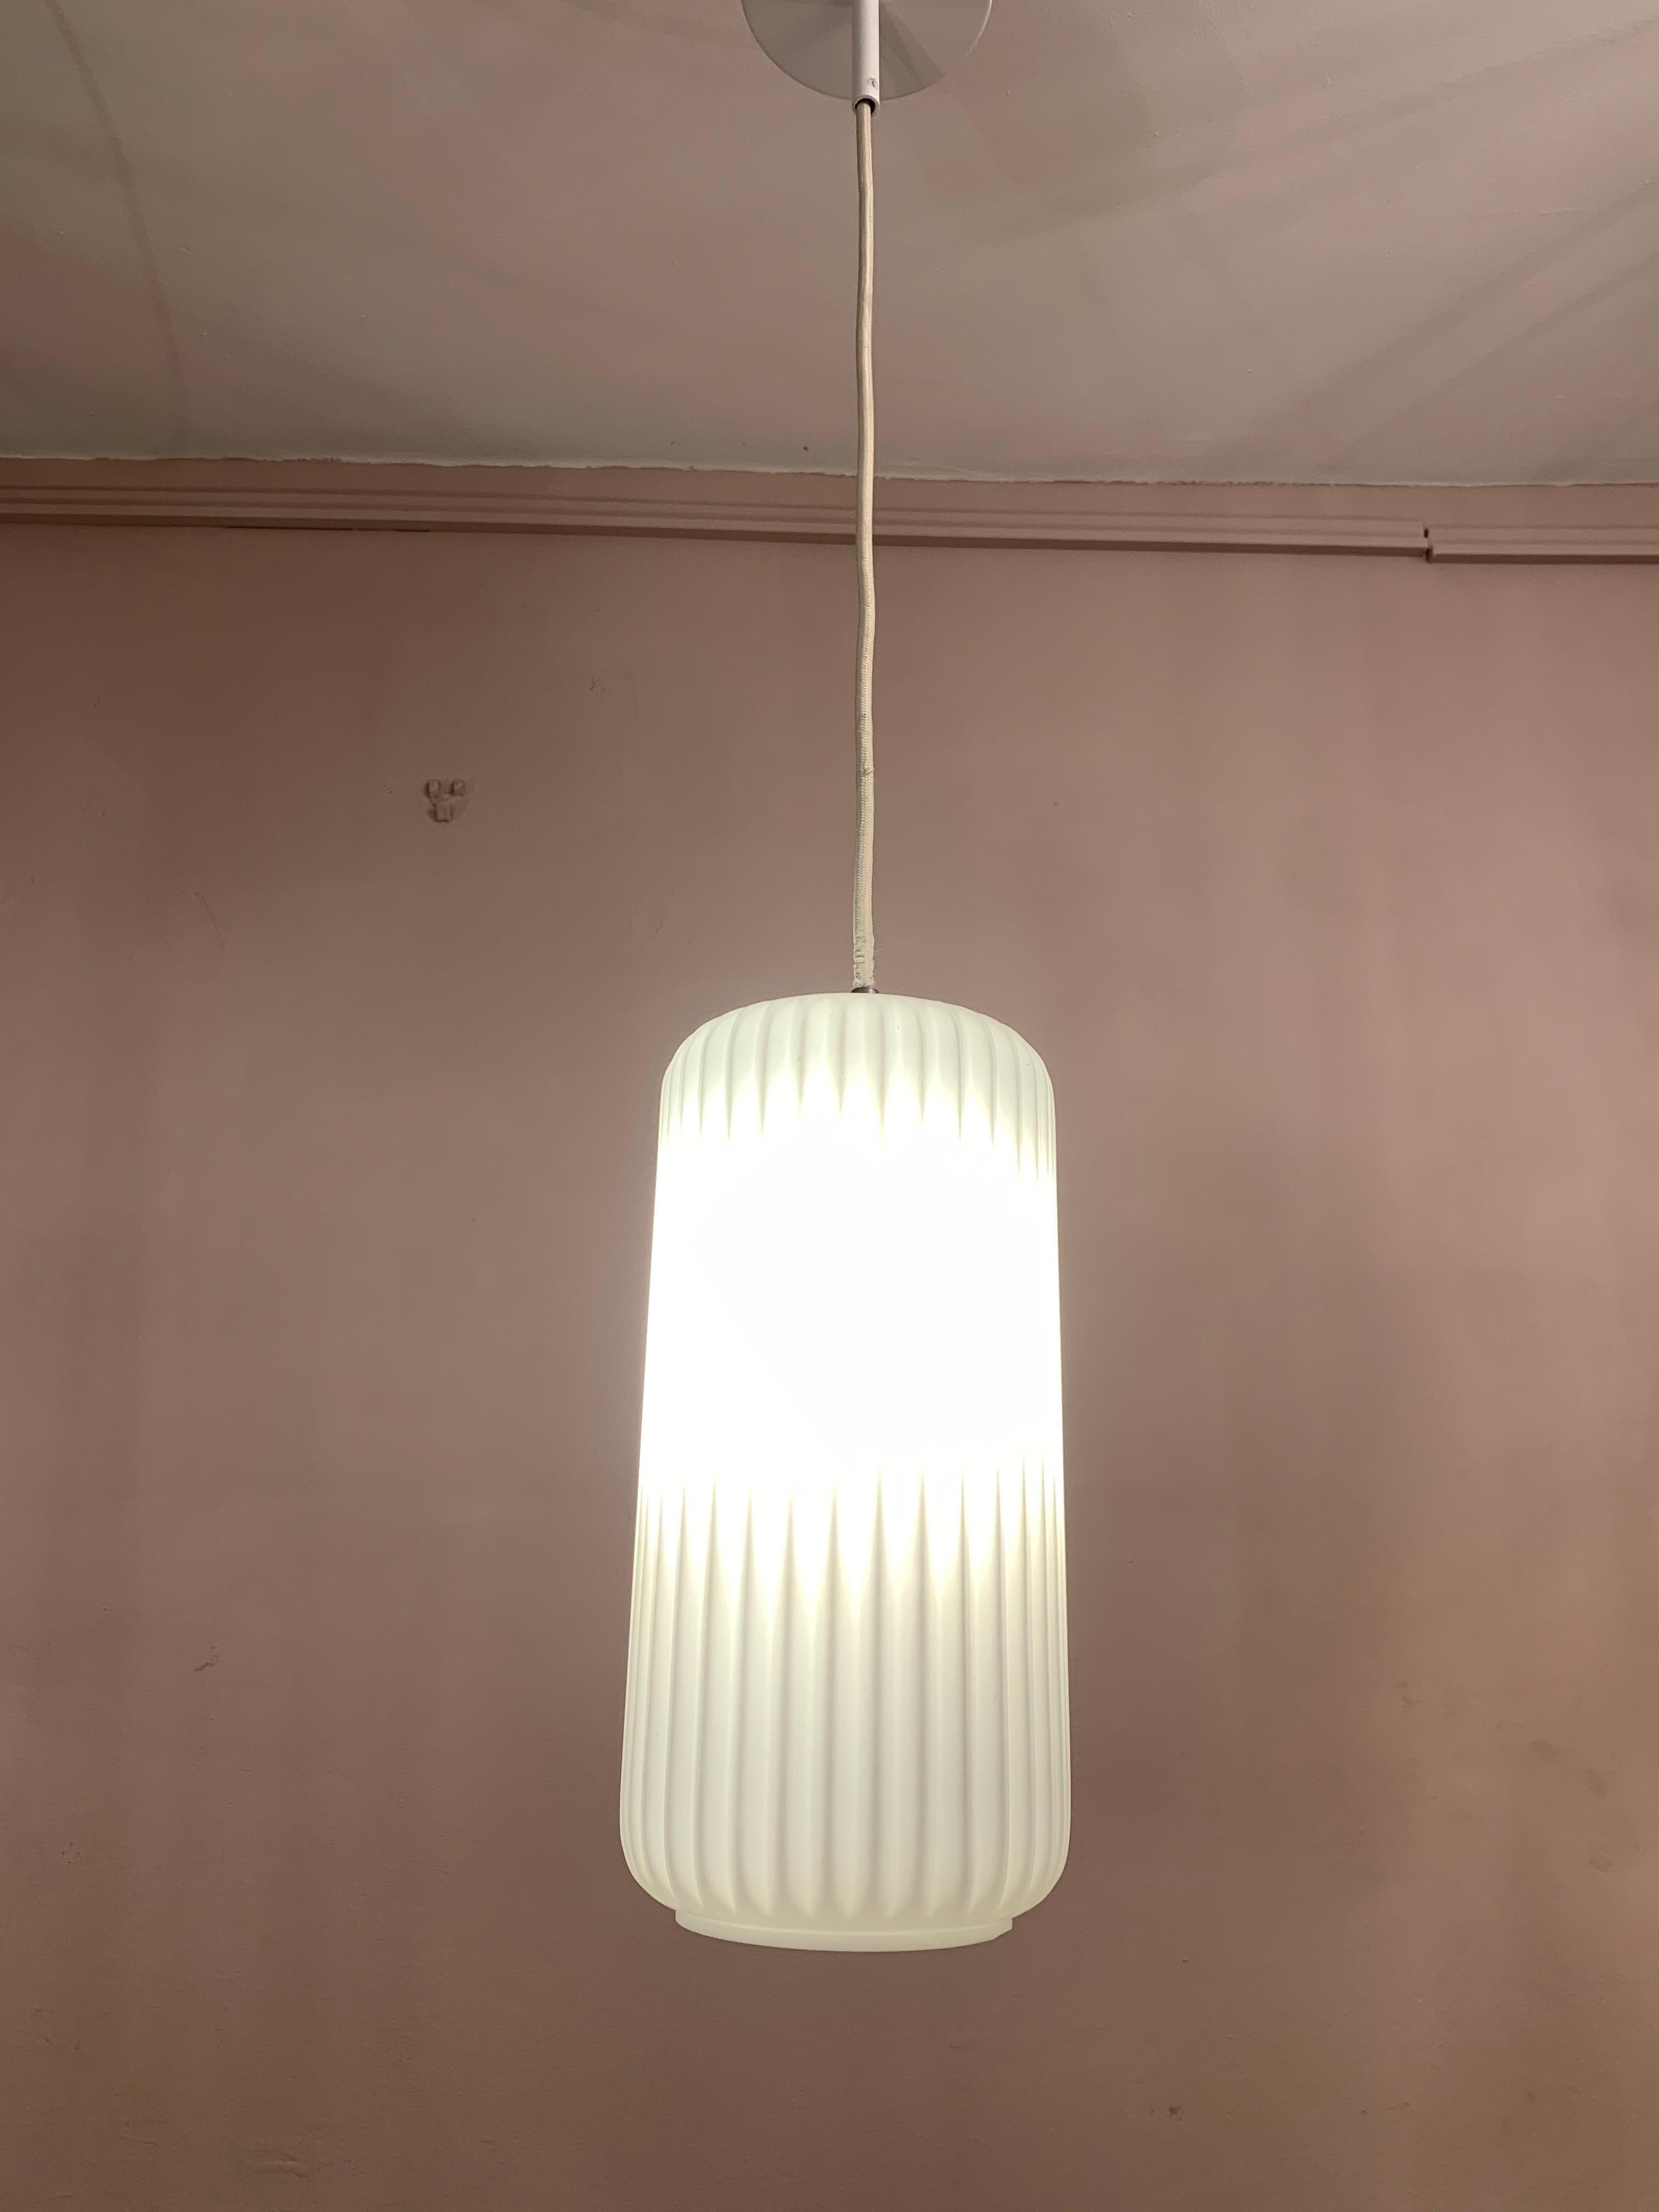 A 1950s Italian, modernist, opaline, glass pendant hanging light. The ribbed glass shades hang from a height adjustable white cord. A single E27 screw in bulb is required in each shade. The light is reminiscent of Stilnovo and Arredoluce lights of